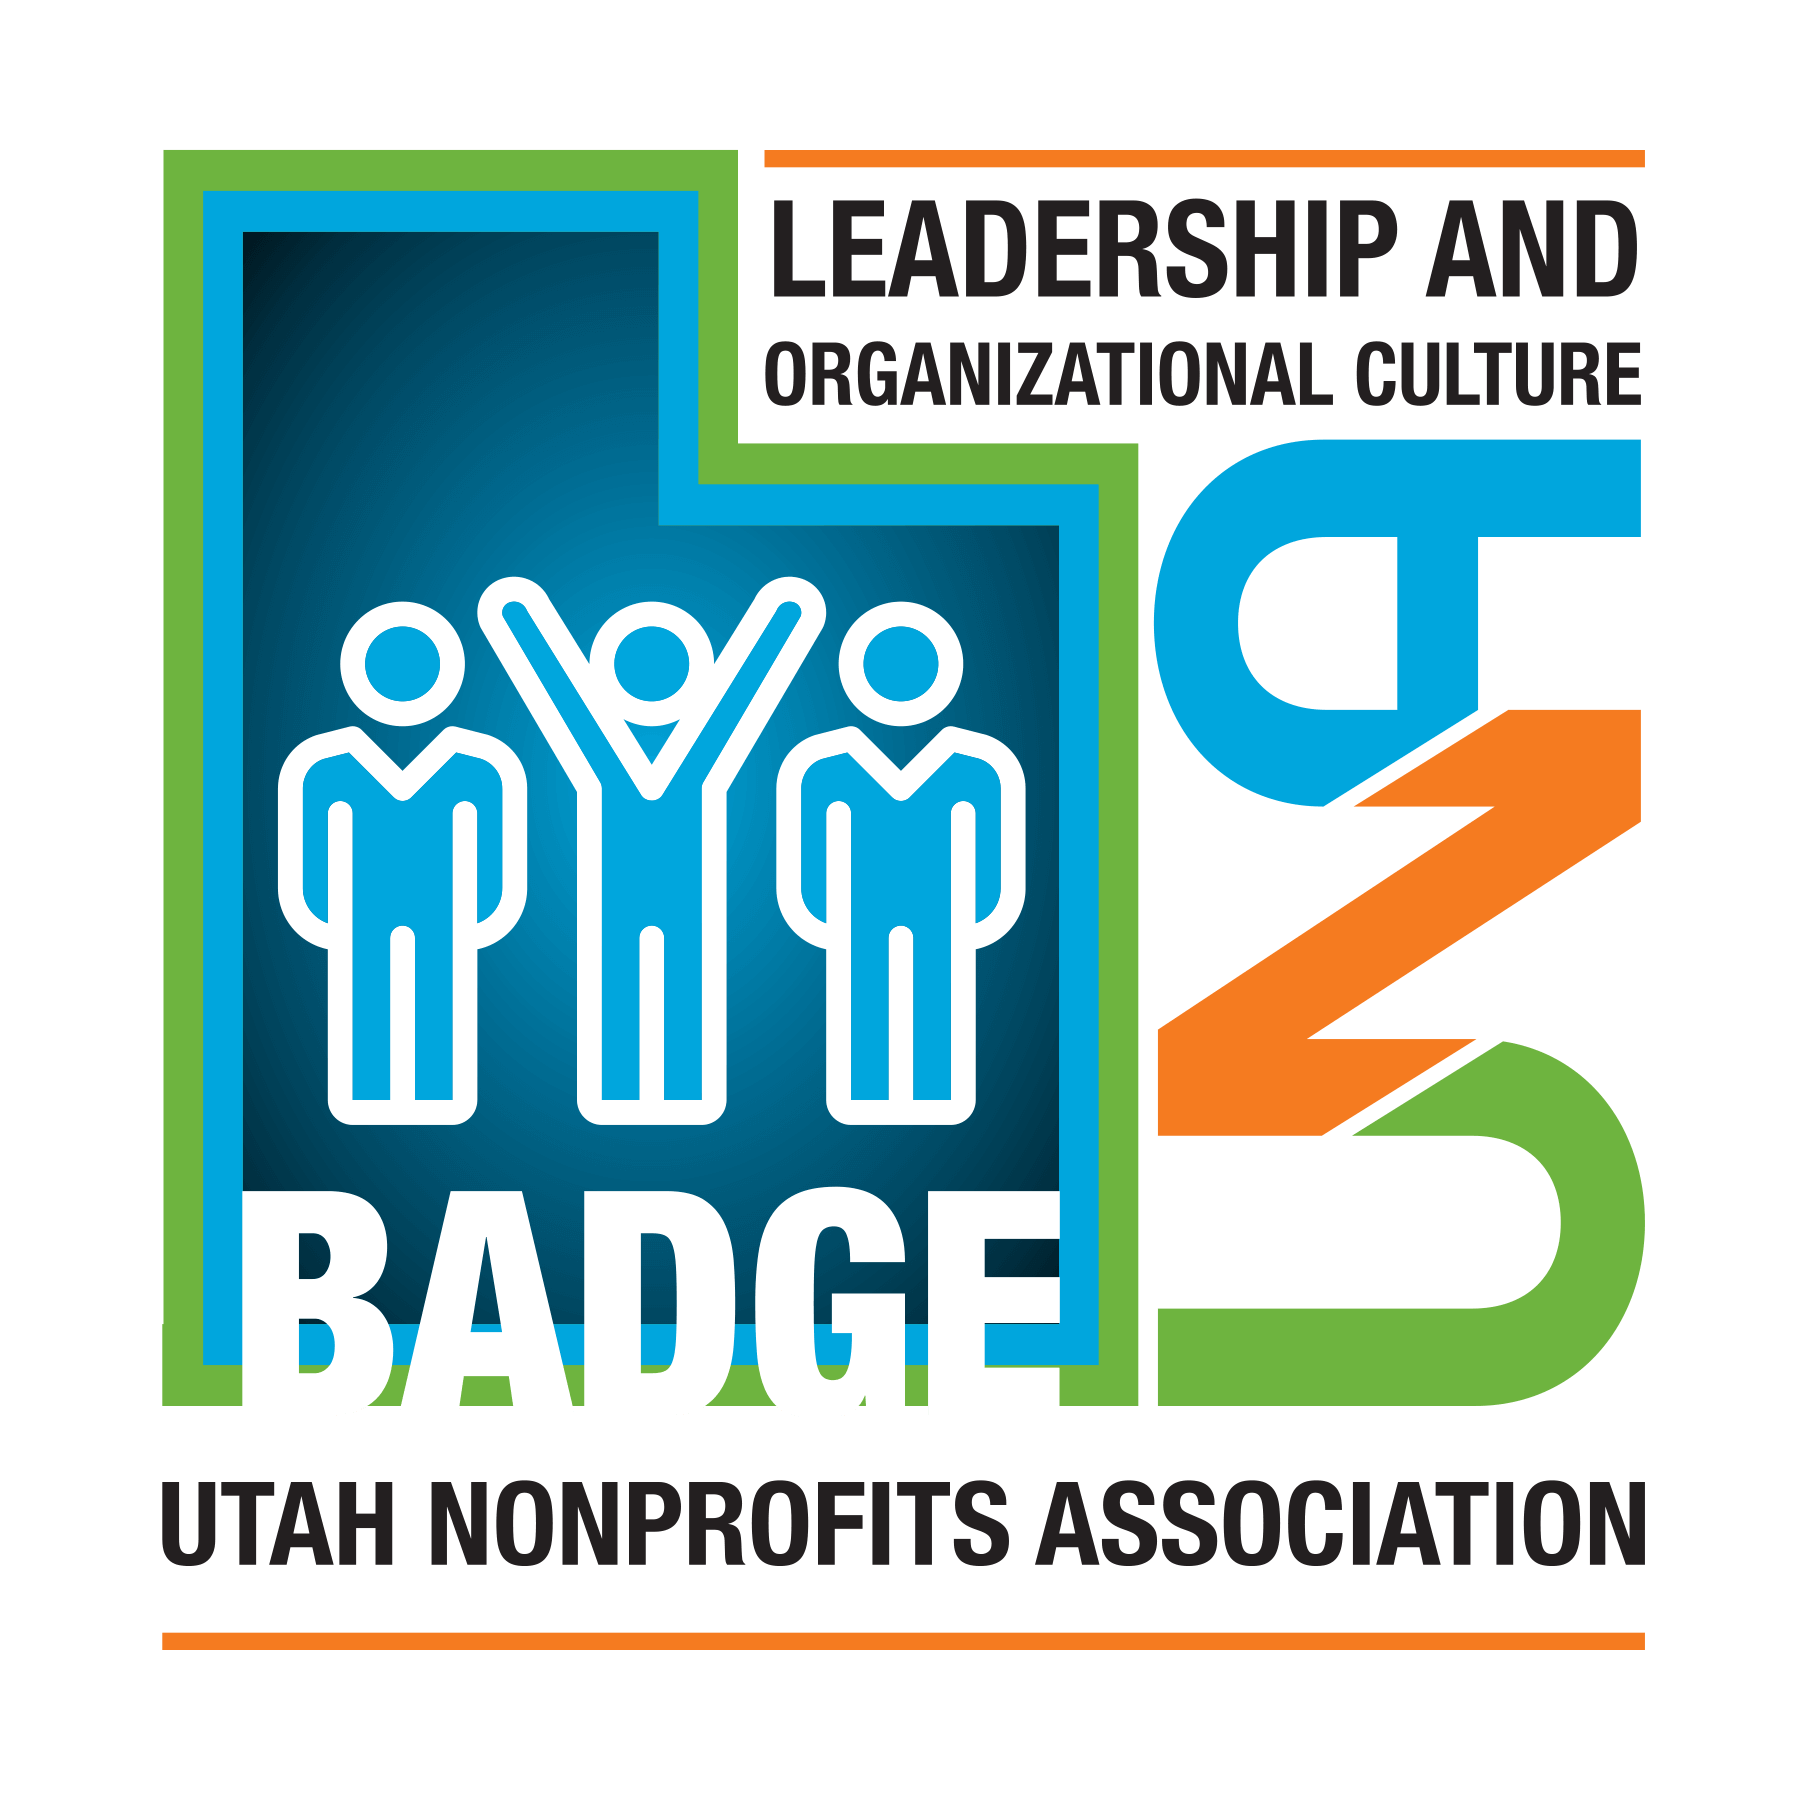 UNA Nonprofit Credential Badge for Leadership and Organizational Culture